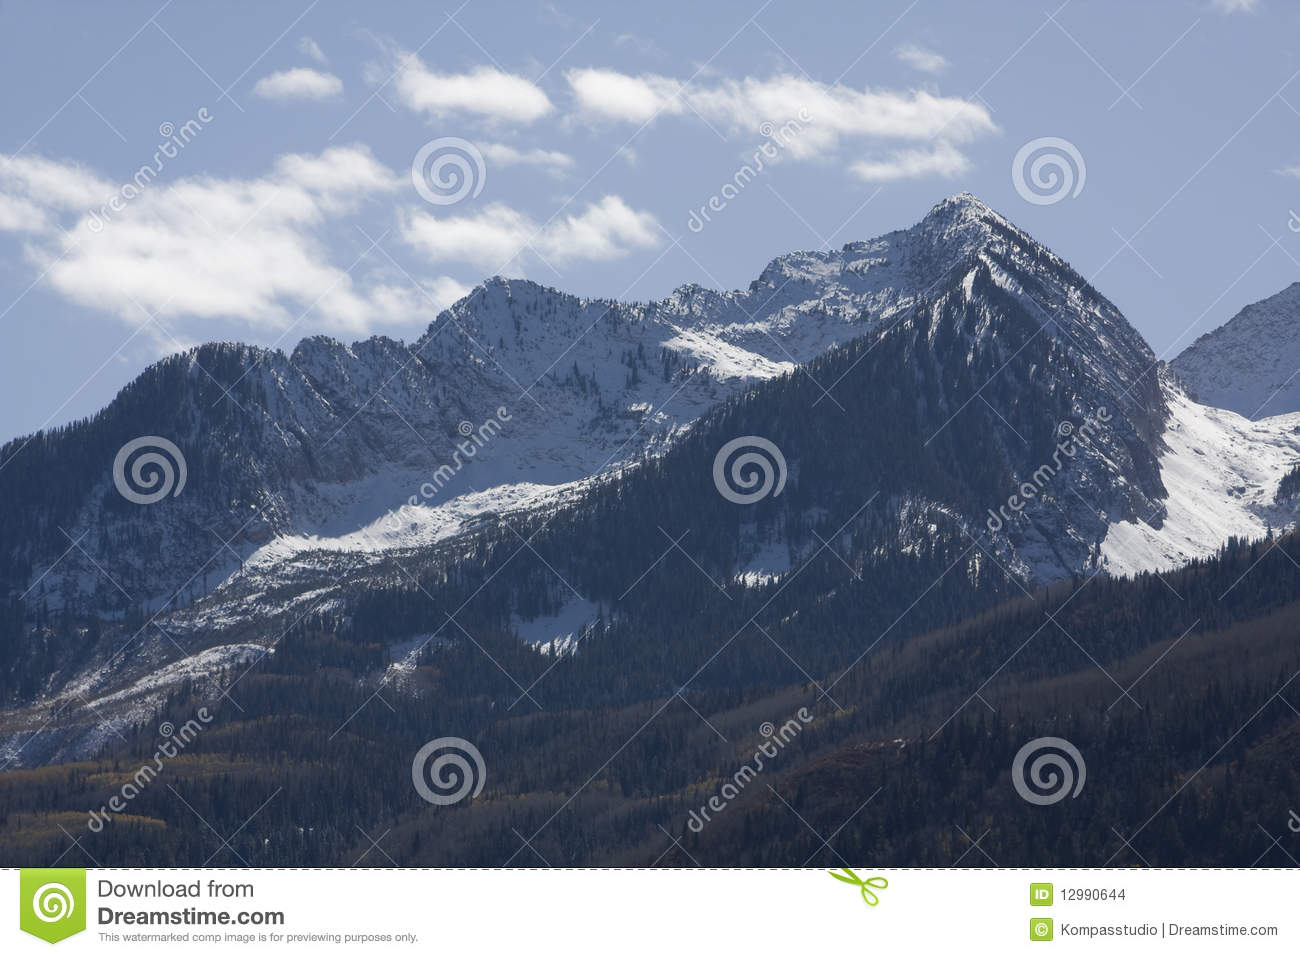 Colorado Rocky Mountains Stock Images   Image  12990644